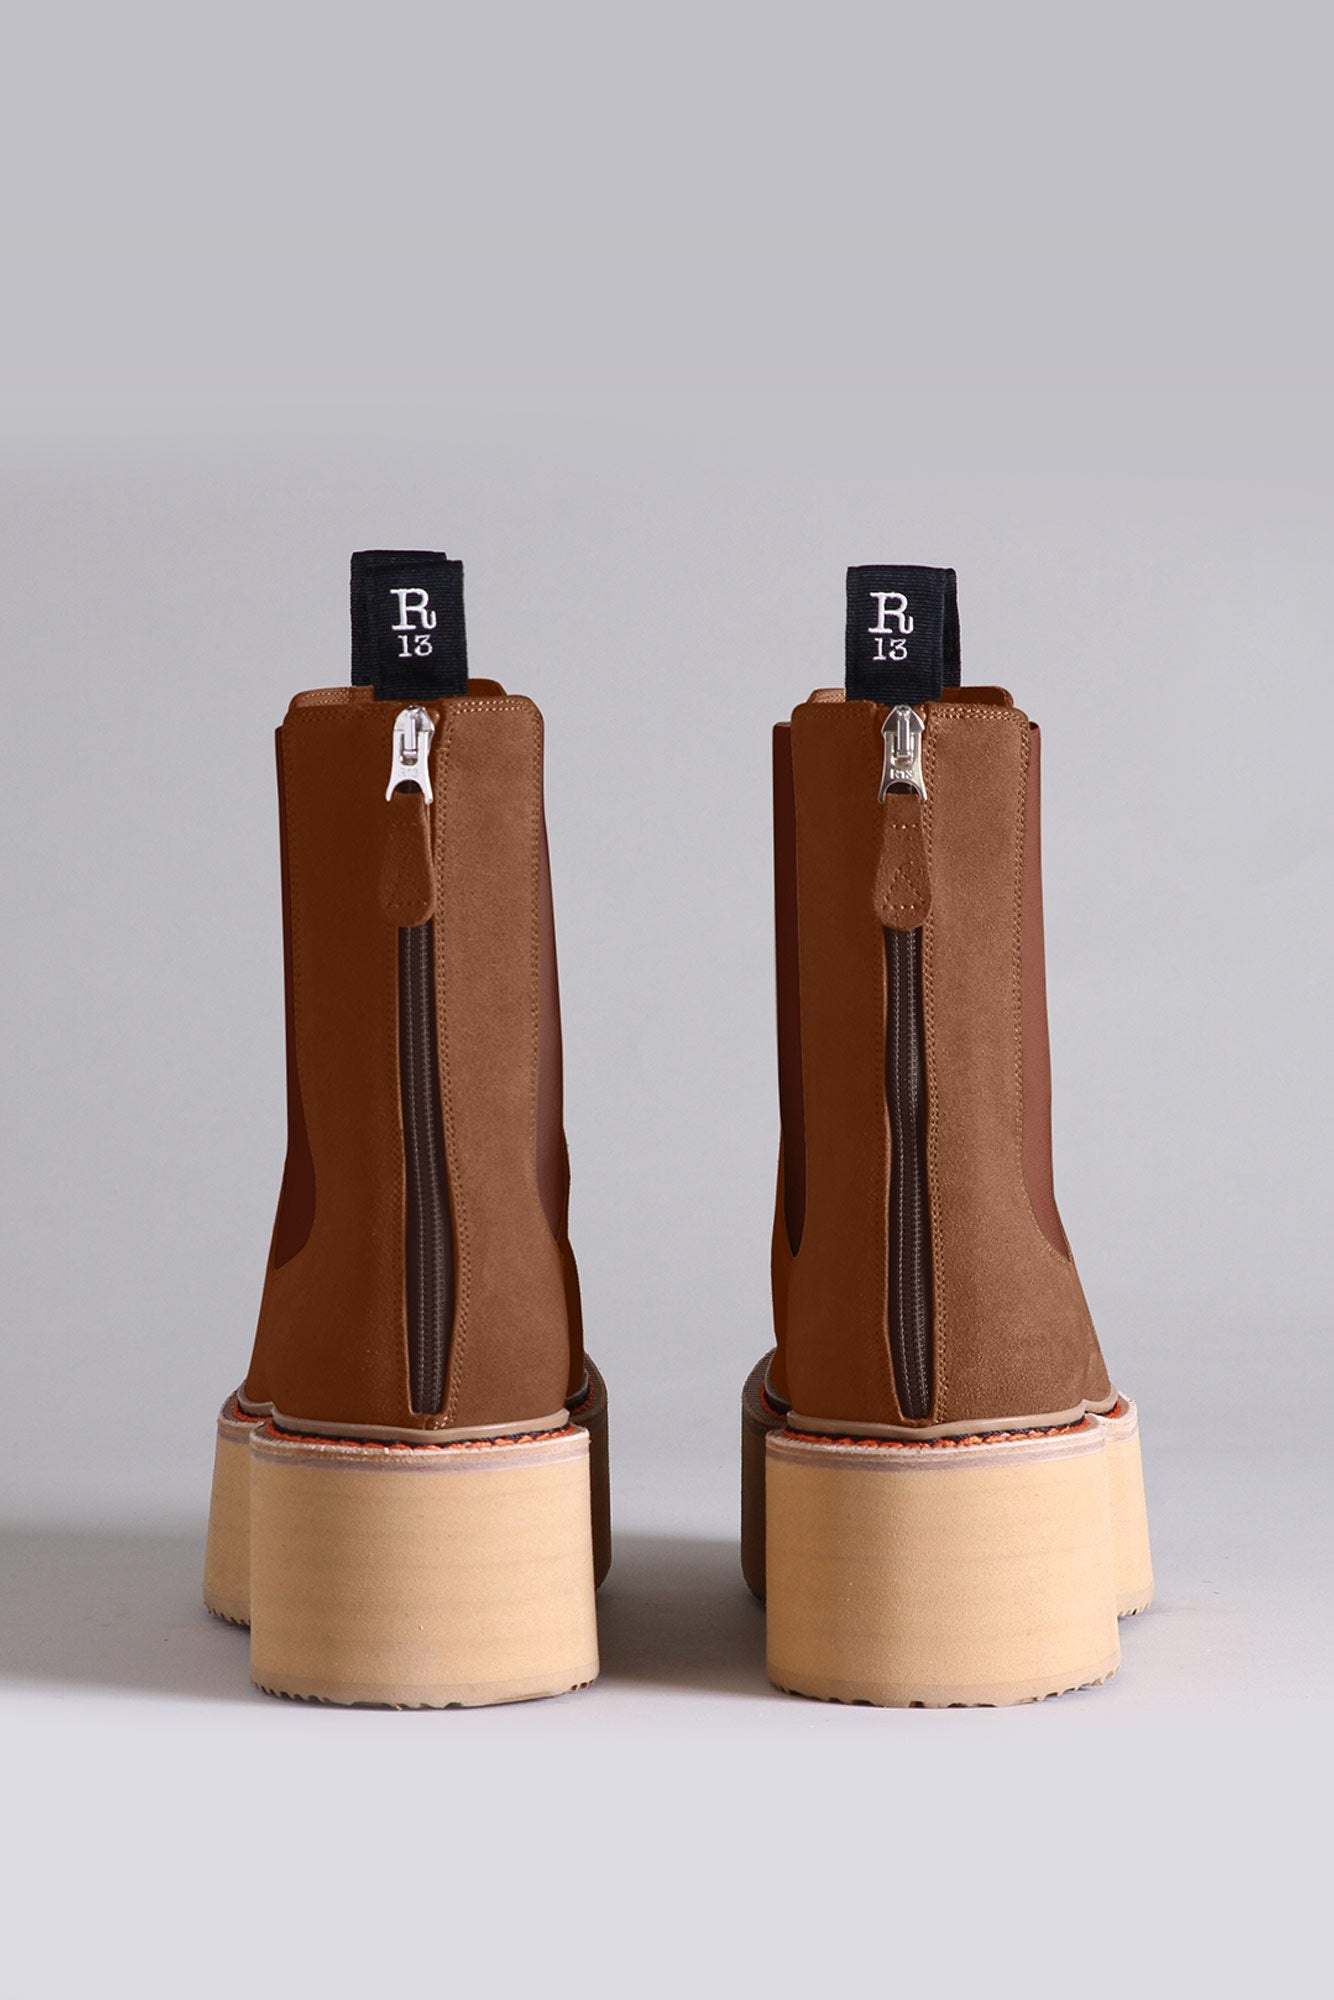 DOUBLE STACK CHELSEA BOOT - BROWN SUEDE | R13 - 3